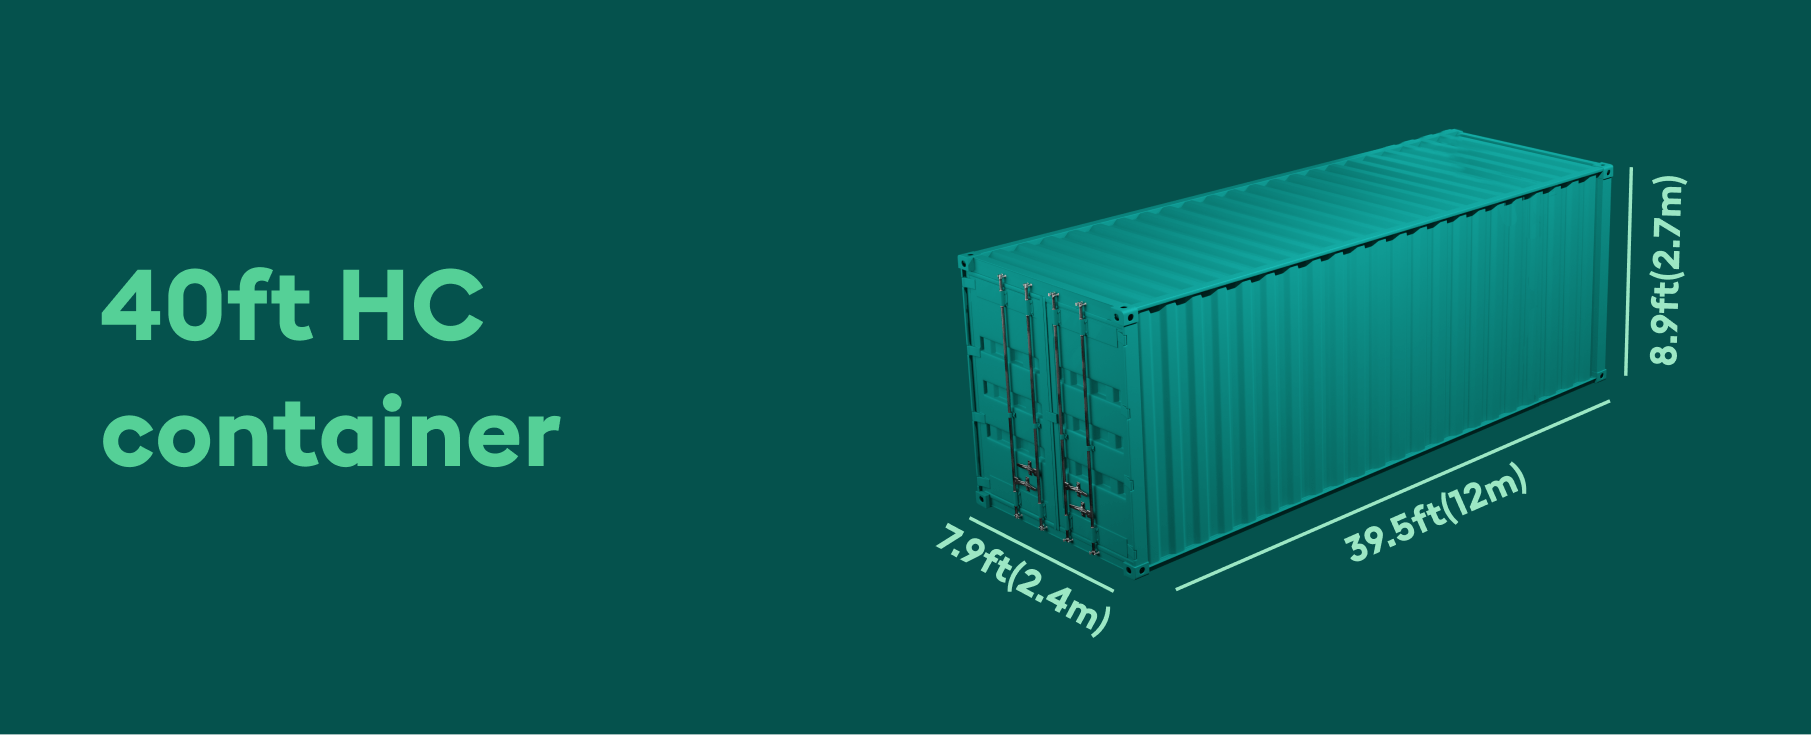 40ft HC container with dimensions